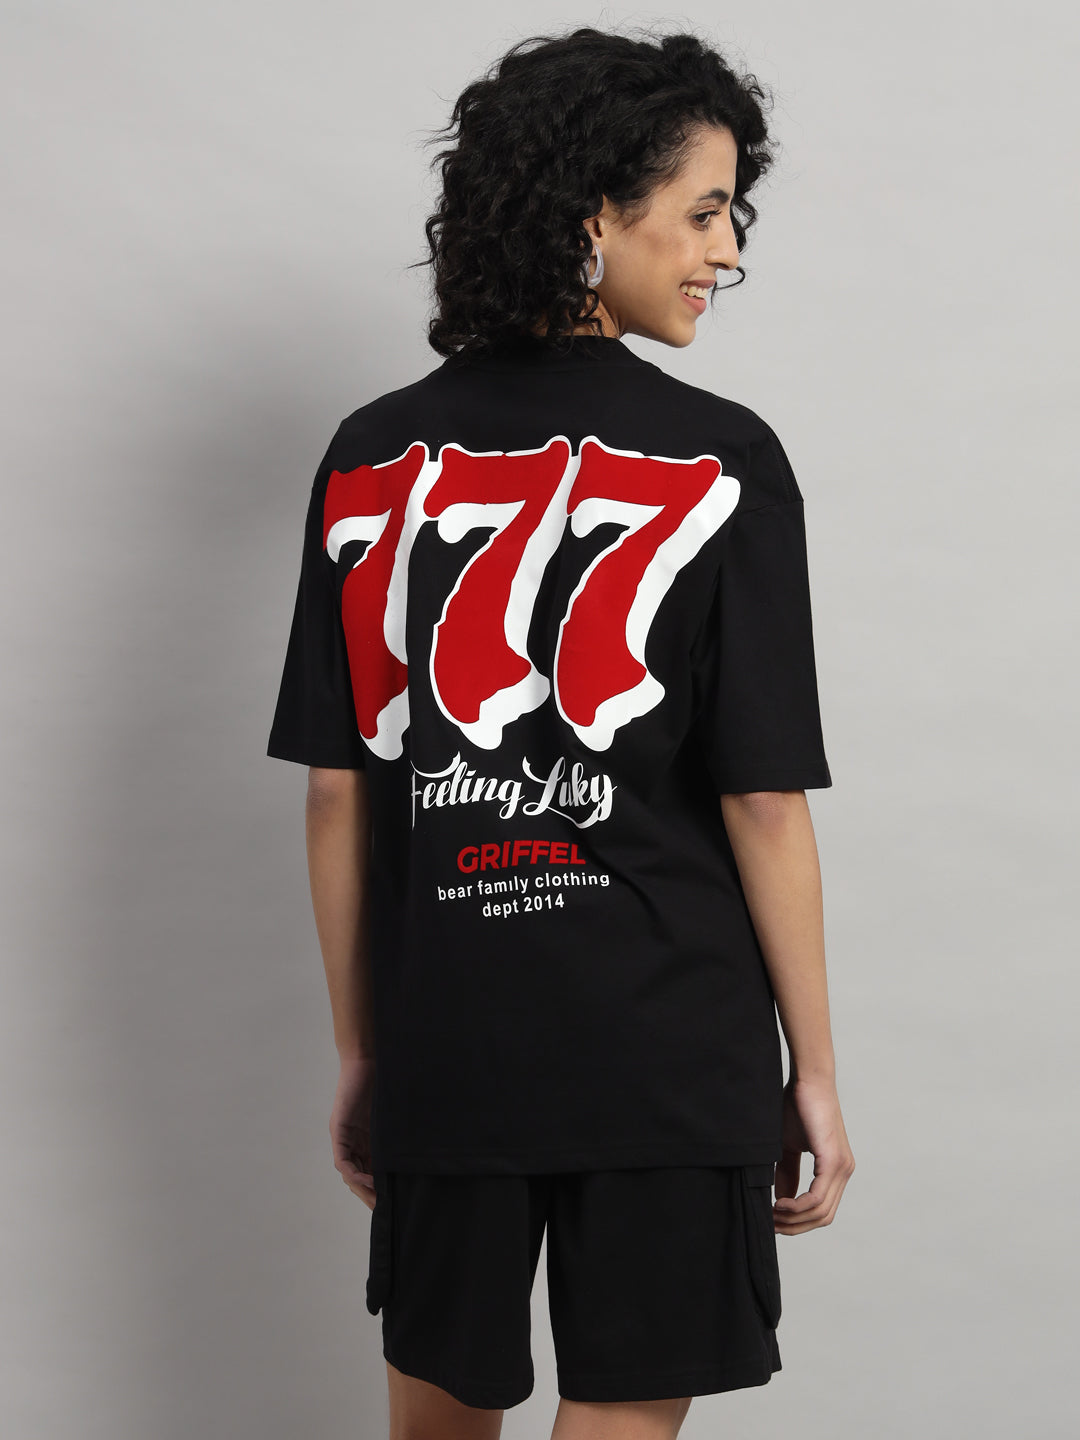 777 T-shirt and Short Set - griffel